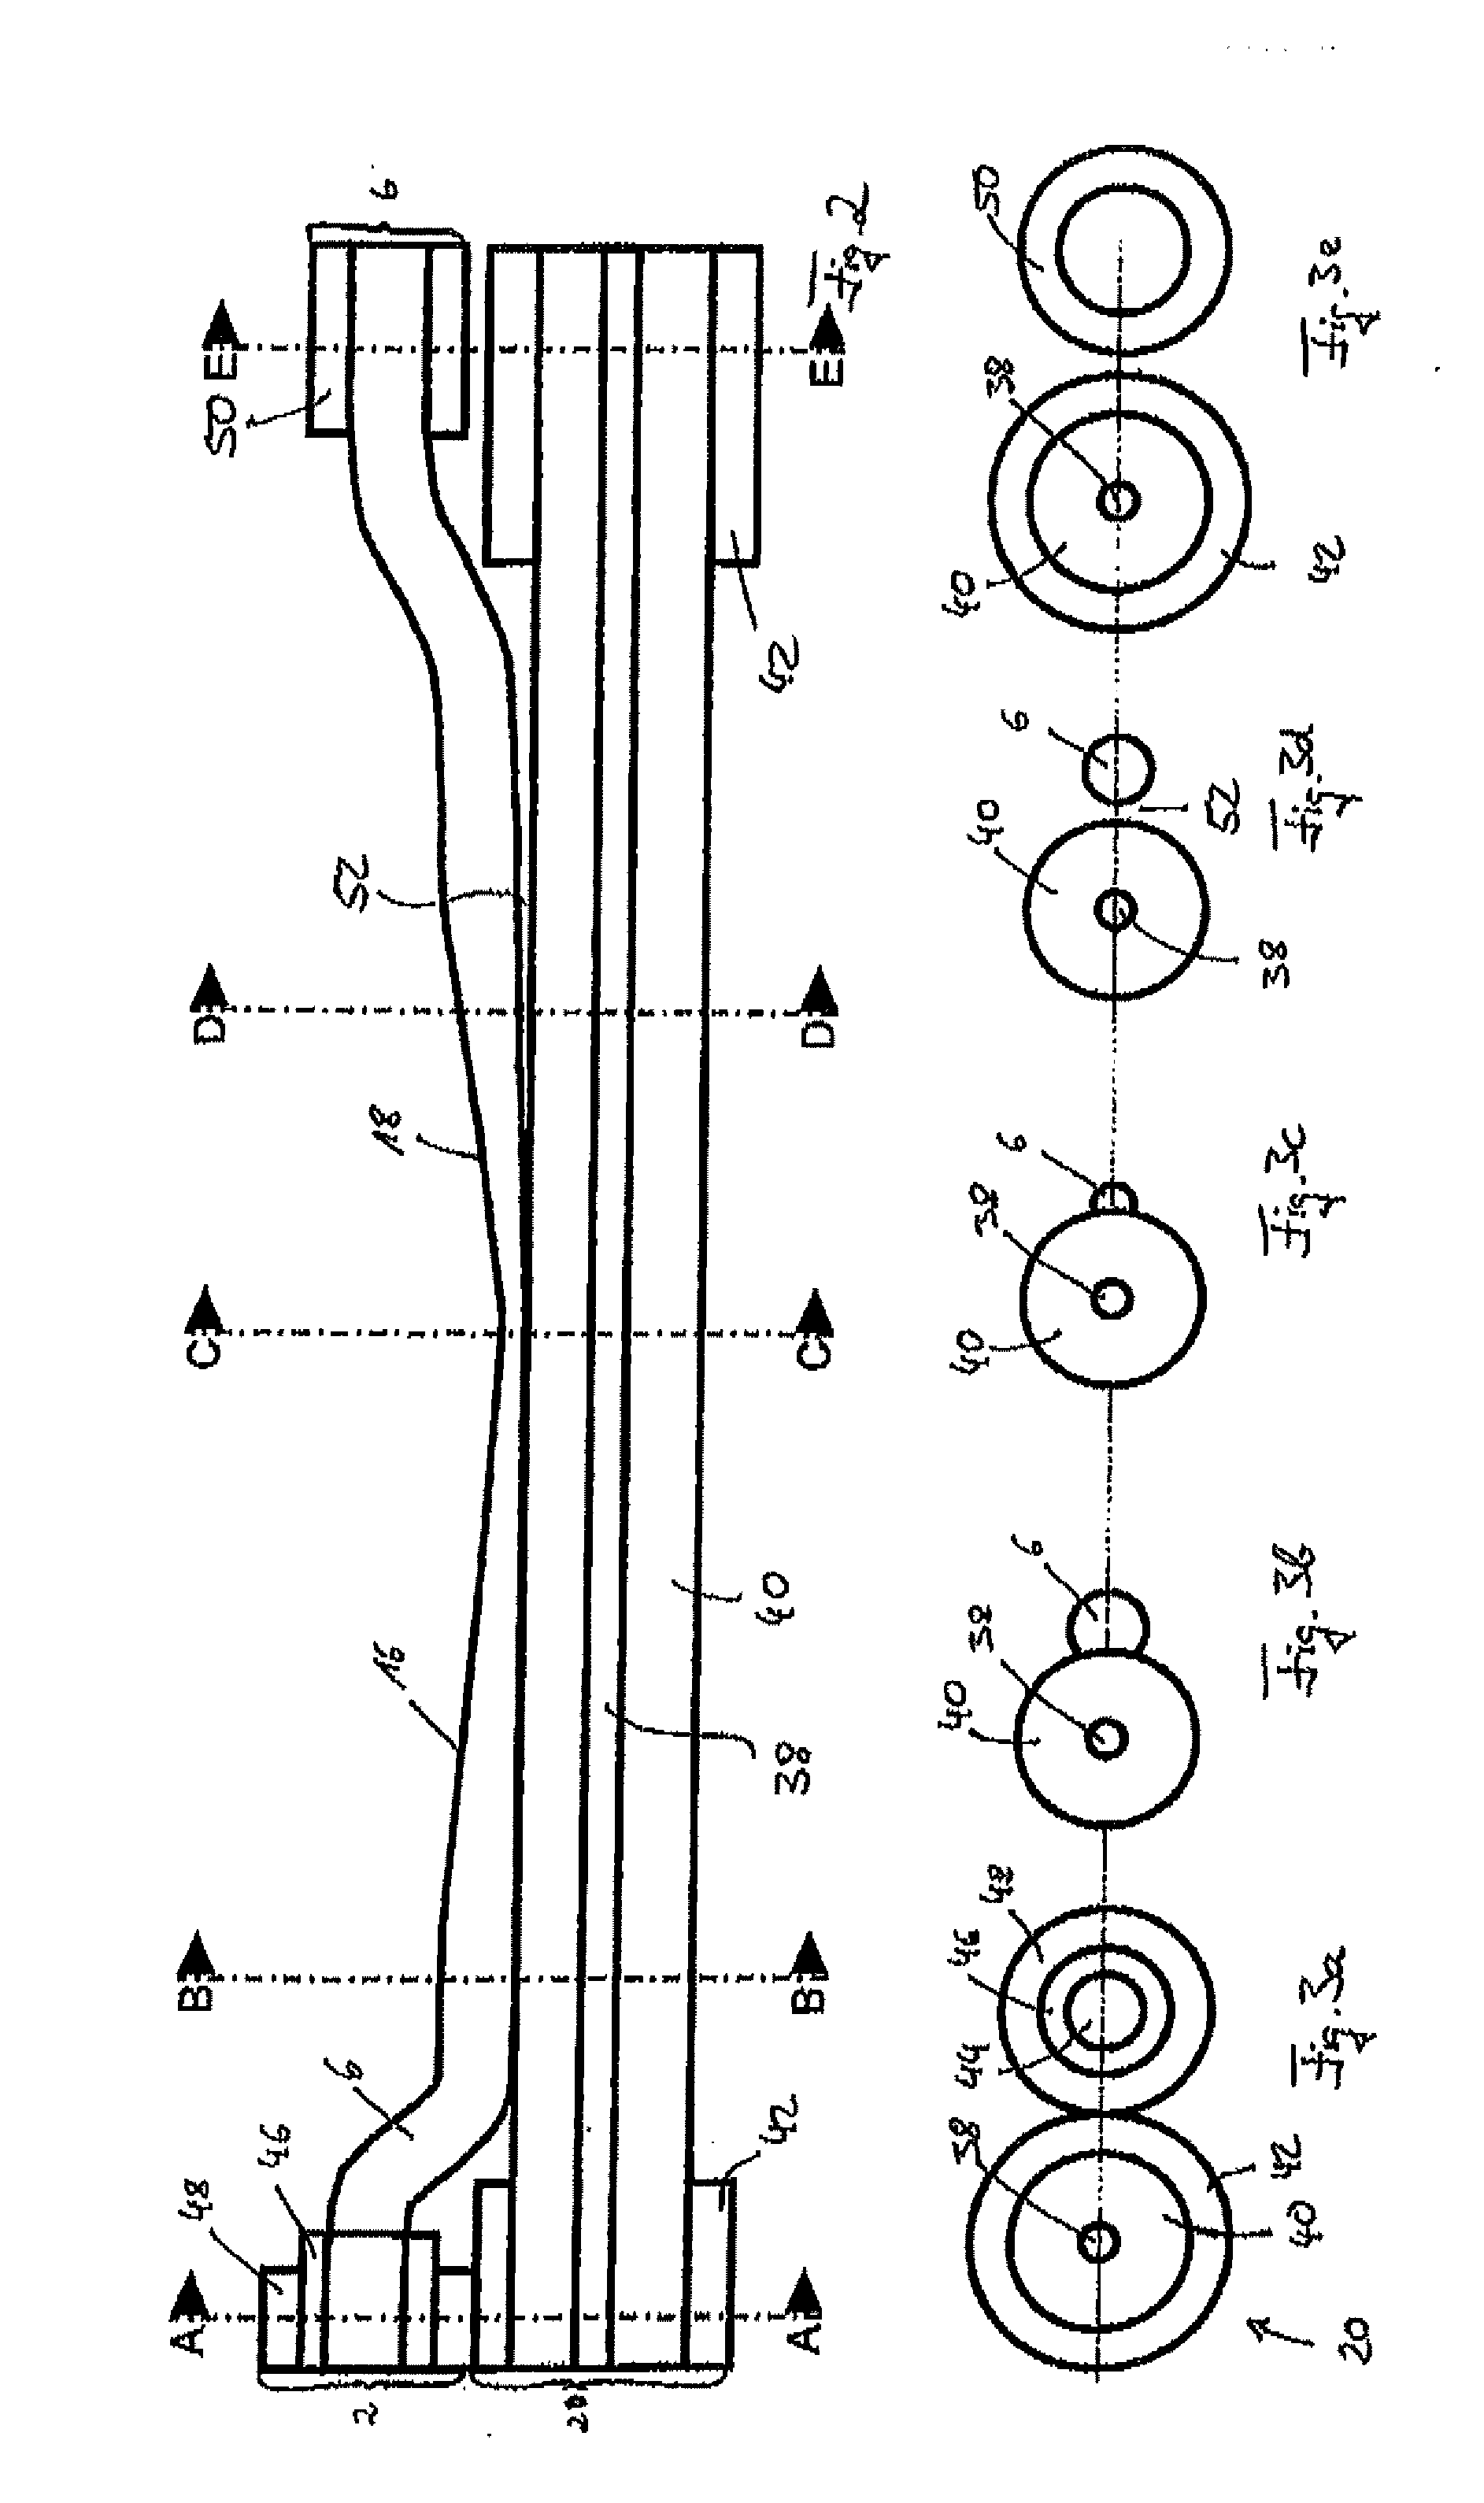 Coupling Arrangement for Non-Axial Transfer of Electromagnetic Radiation